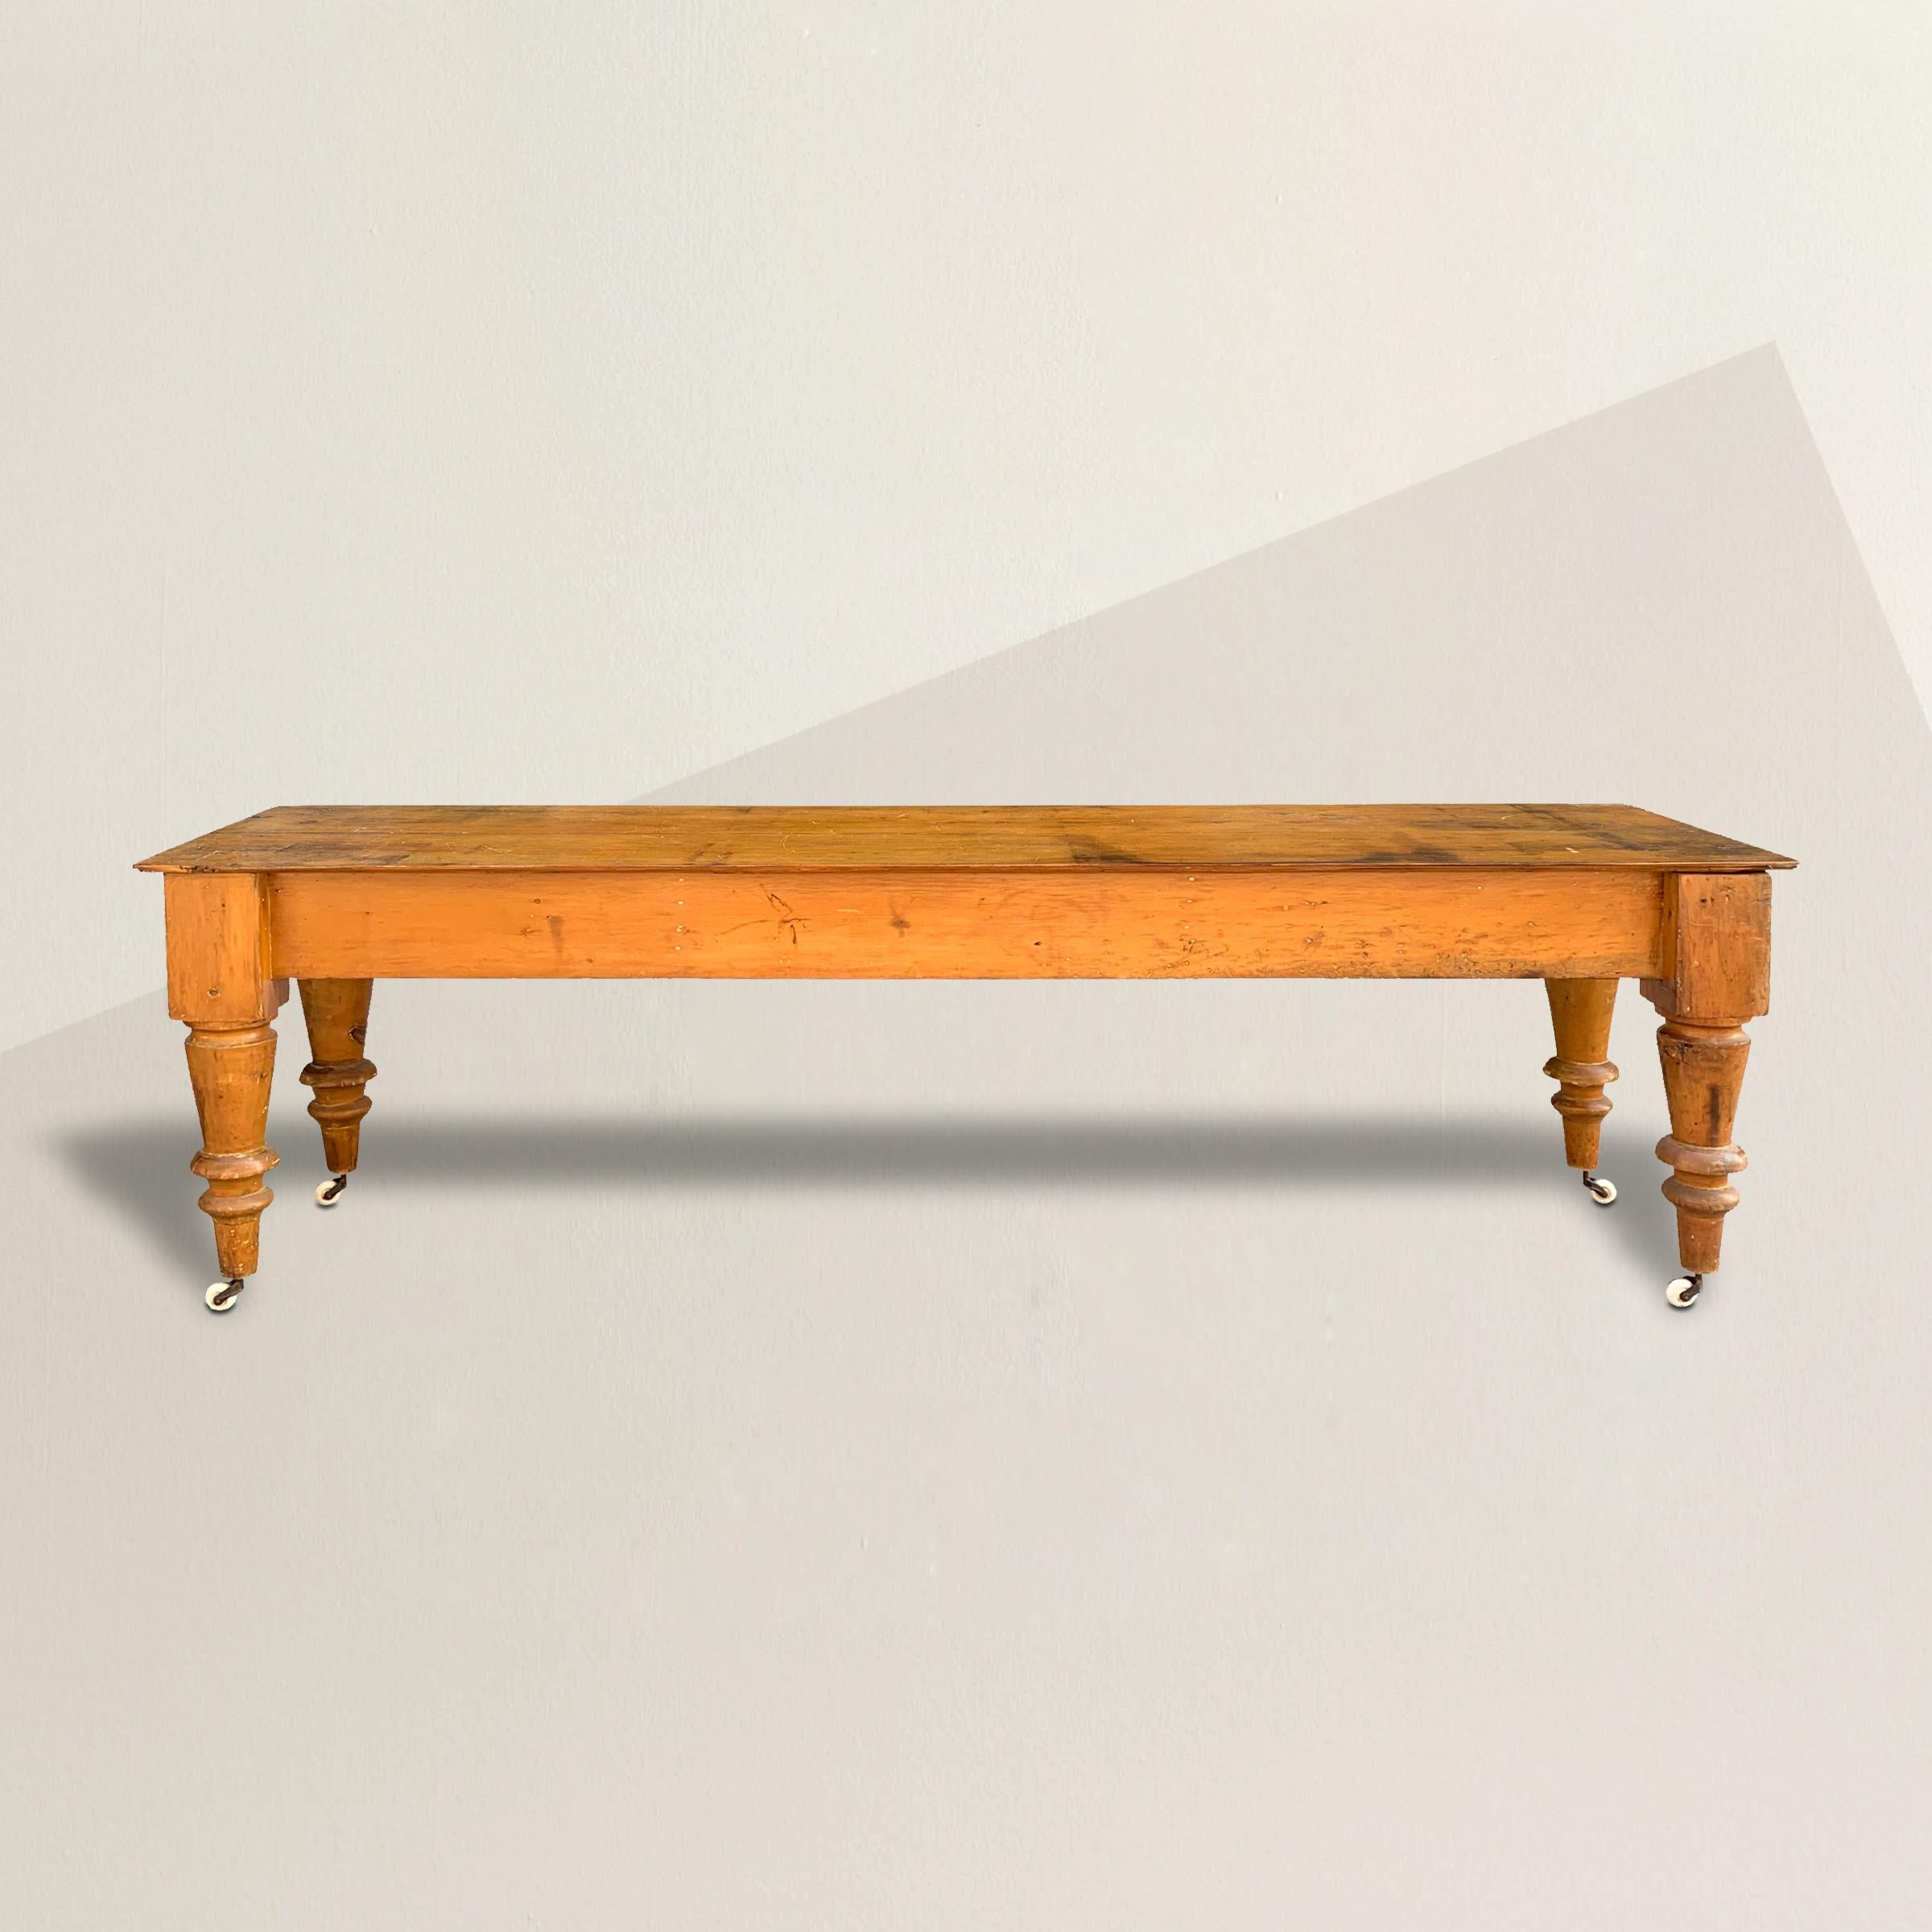 A wonderful 19th century American maple table, probably from a butcher's shop or bakery, with overly exaggerated chunky turned tapered legs with removable porcelain casters and a well worn top with one live-edge and one strait edge. Perfect for